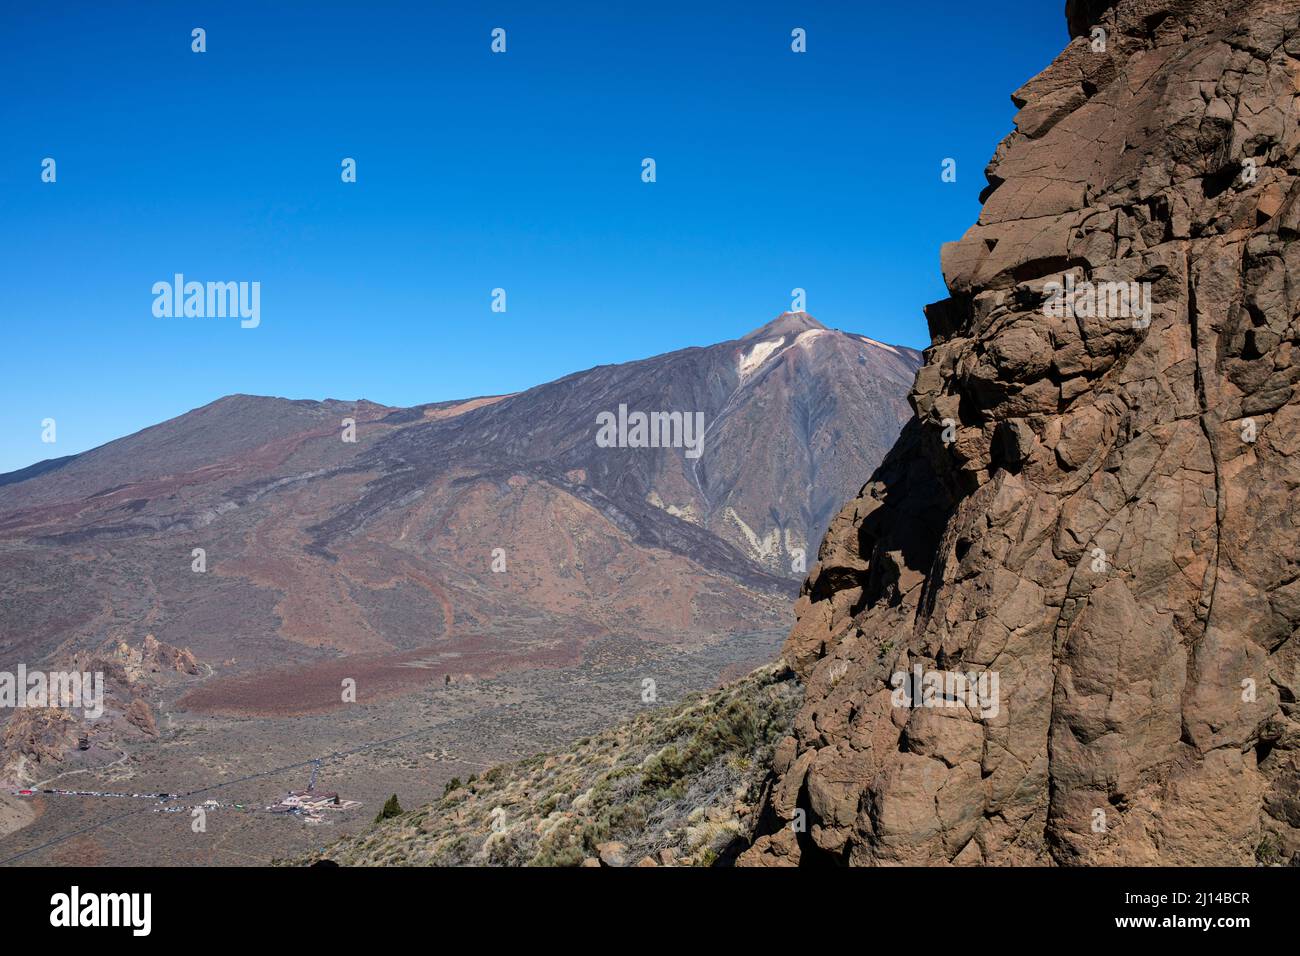 View towards Mount teide from the ascent to Guajara mountain in the Las Canadas del Teide national park, Tenerife, Canary Islands, Spain Stock Photo